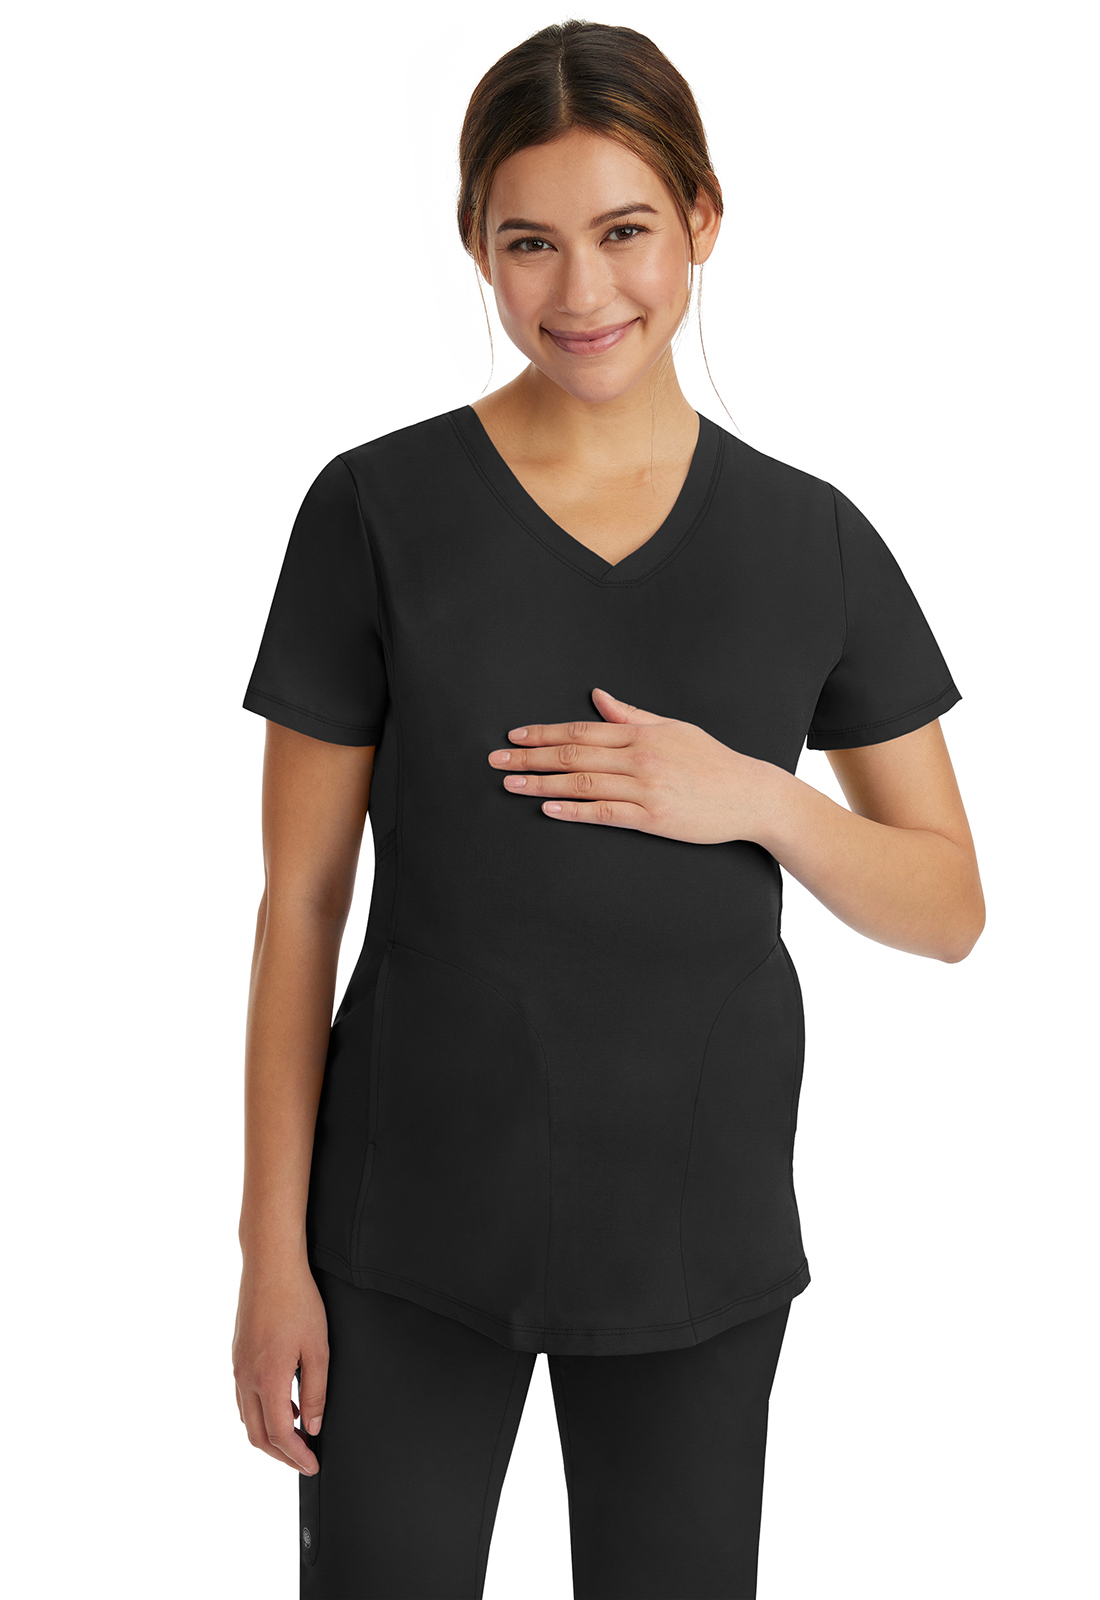 Healing Hands HH Works Mila Maternity Top-